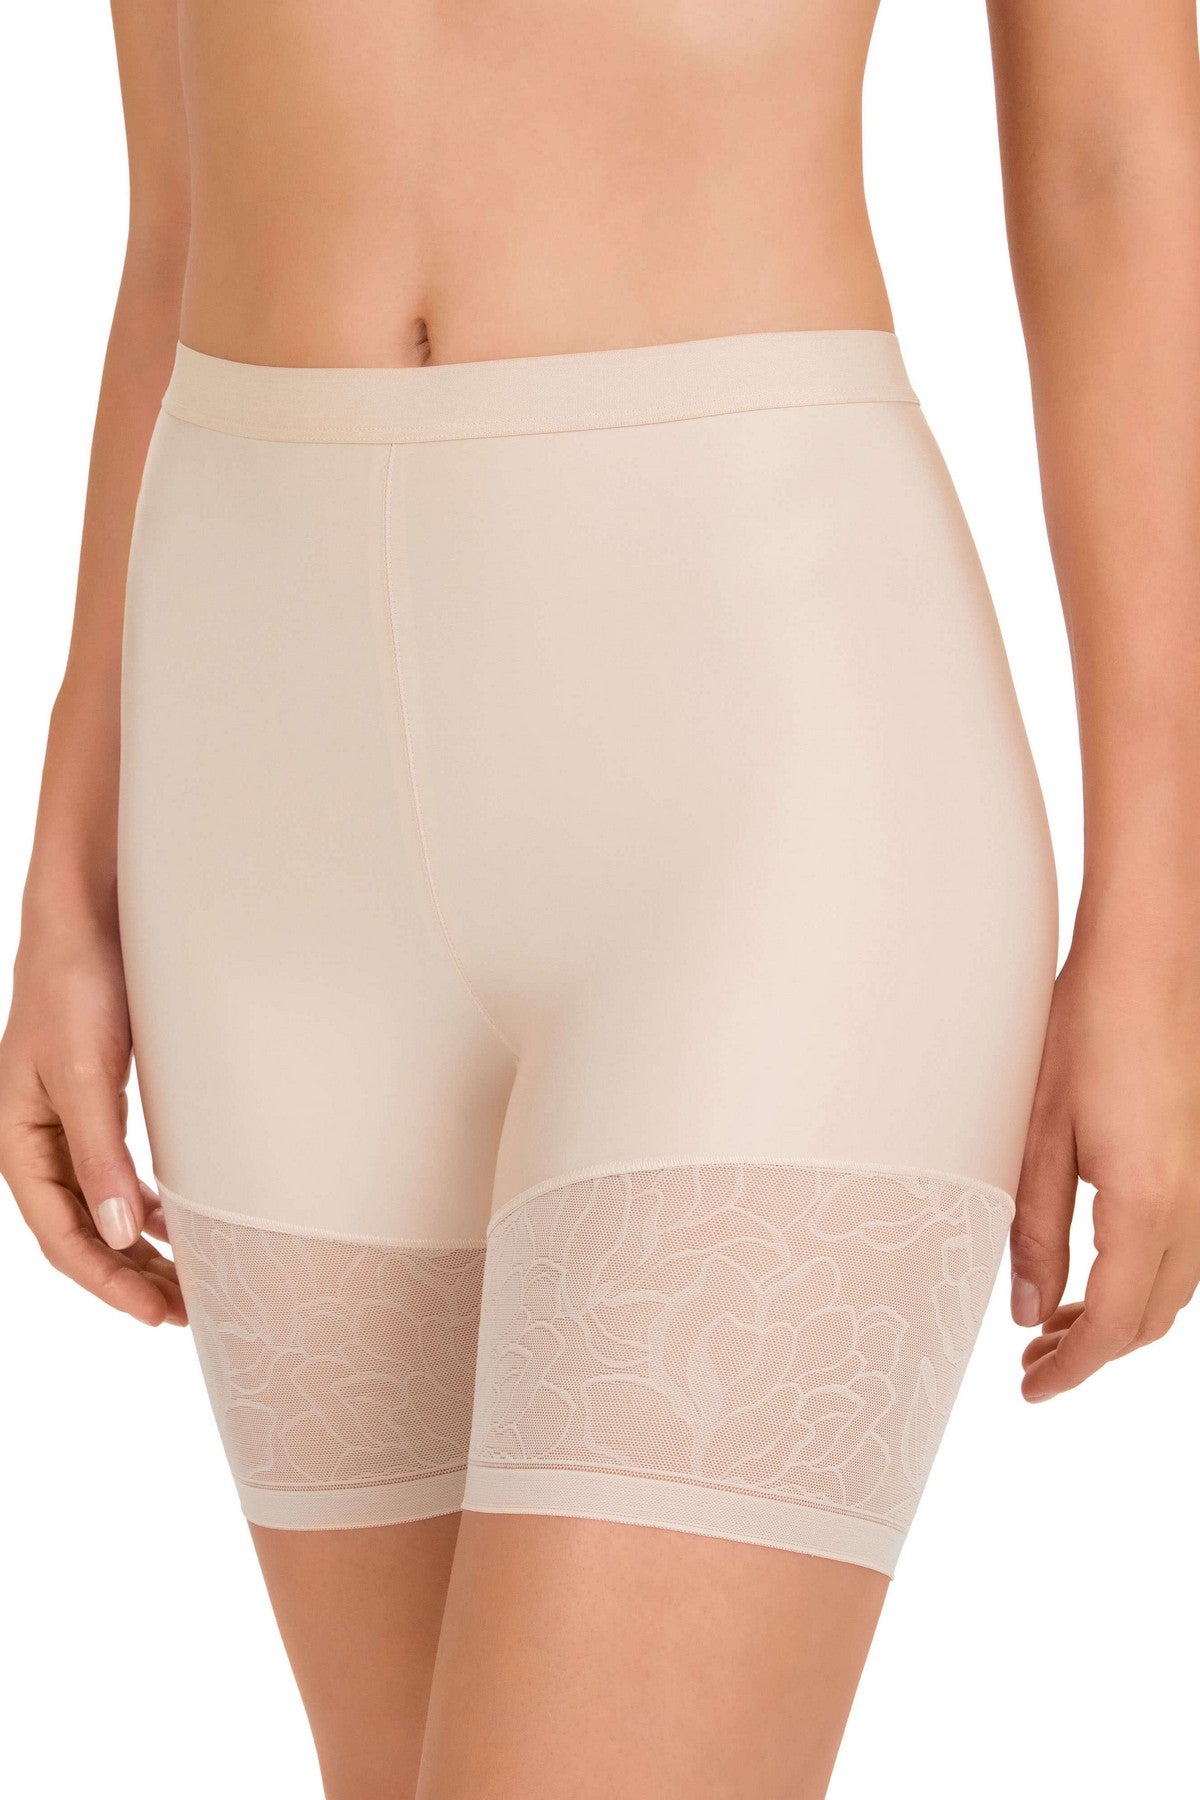 Felina Conturelle Silhouette Long panty 043 NUDE buy for the best price  CAD$ 95.00 - Canada and U.S. delivery – Bralissimo